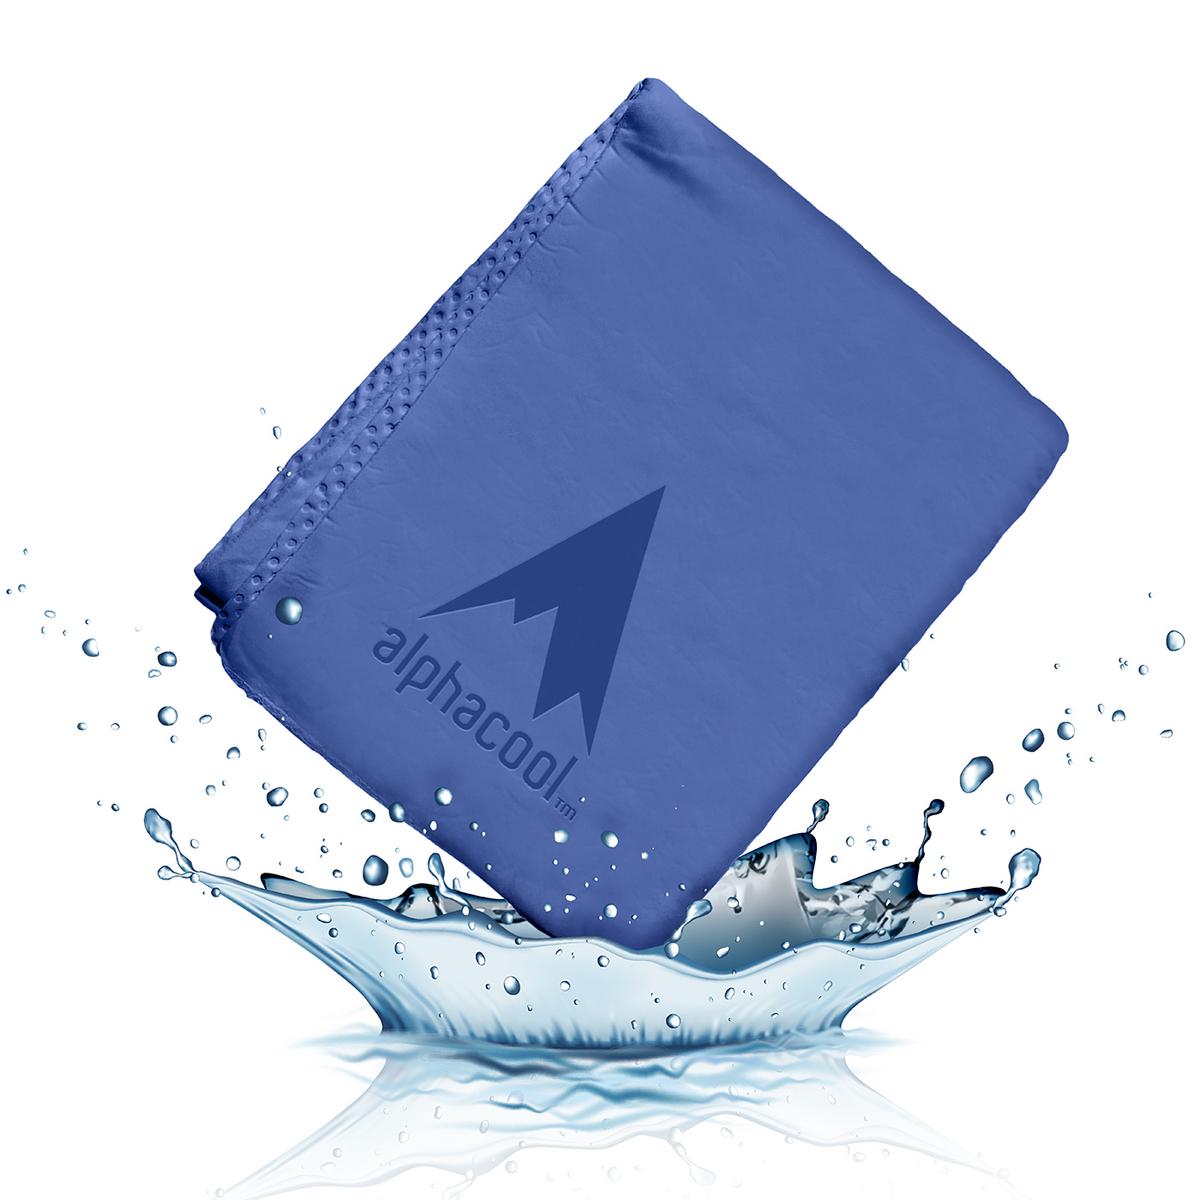 AlphaCool PVA Instant Cooling Towel (2-Pack)